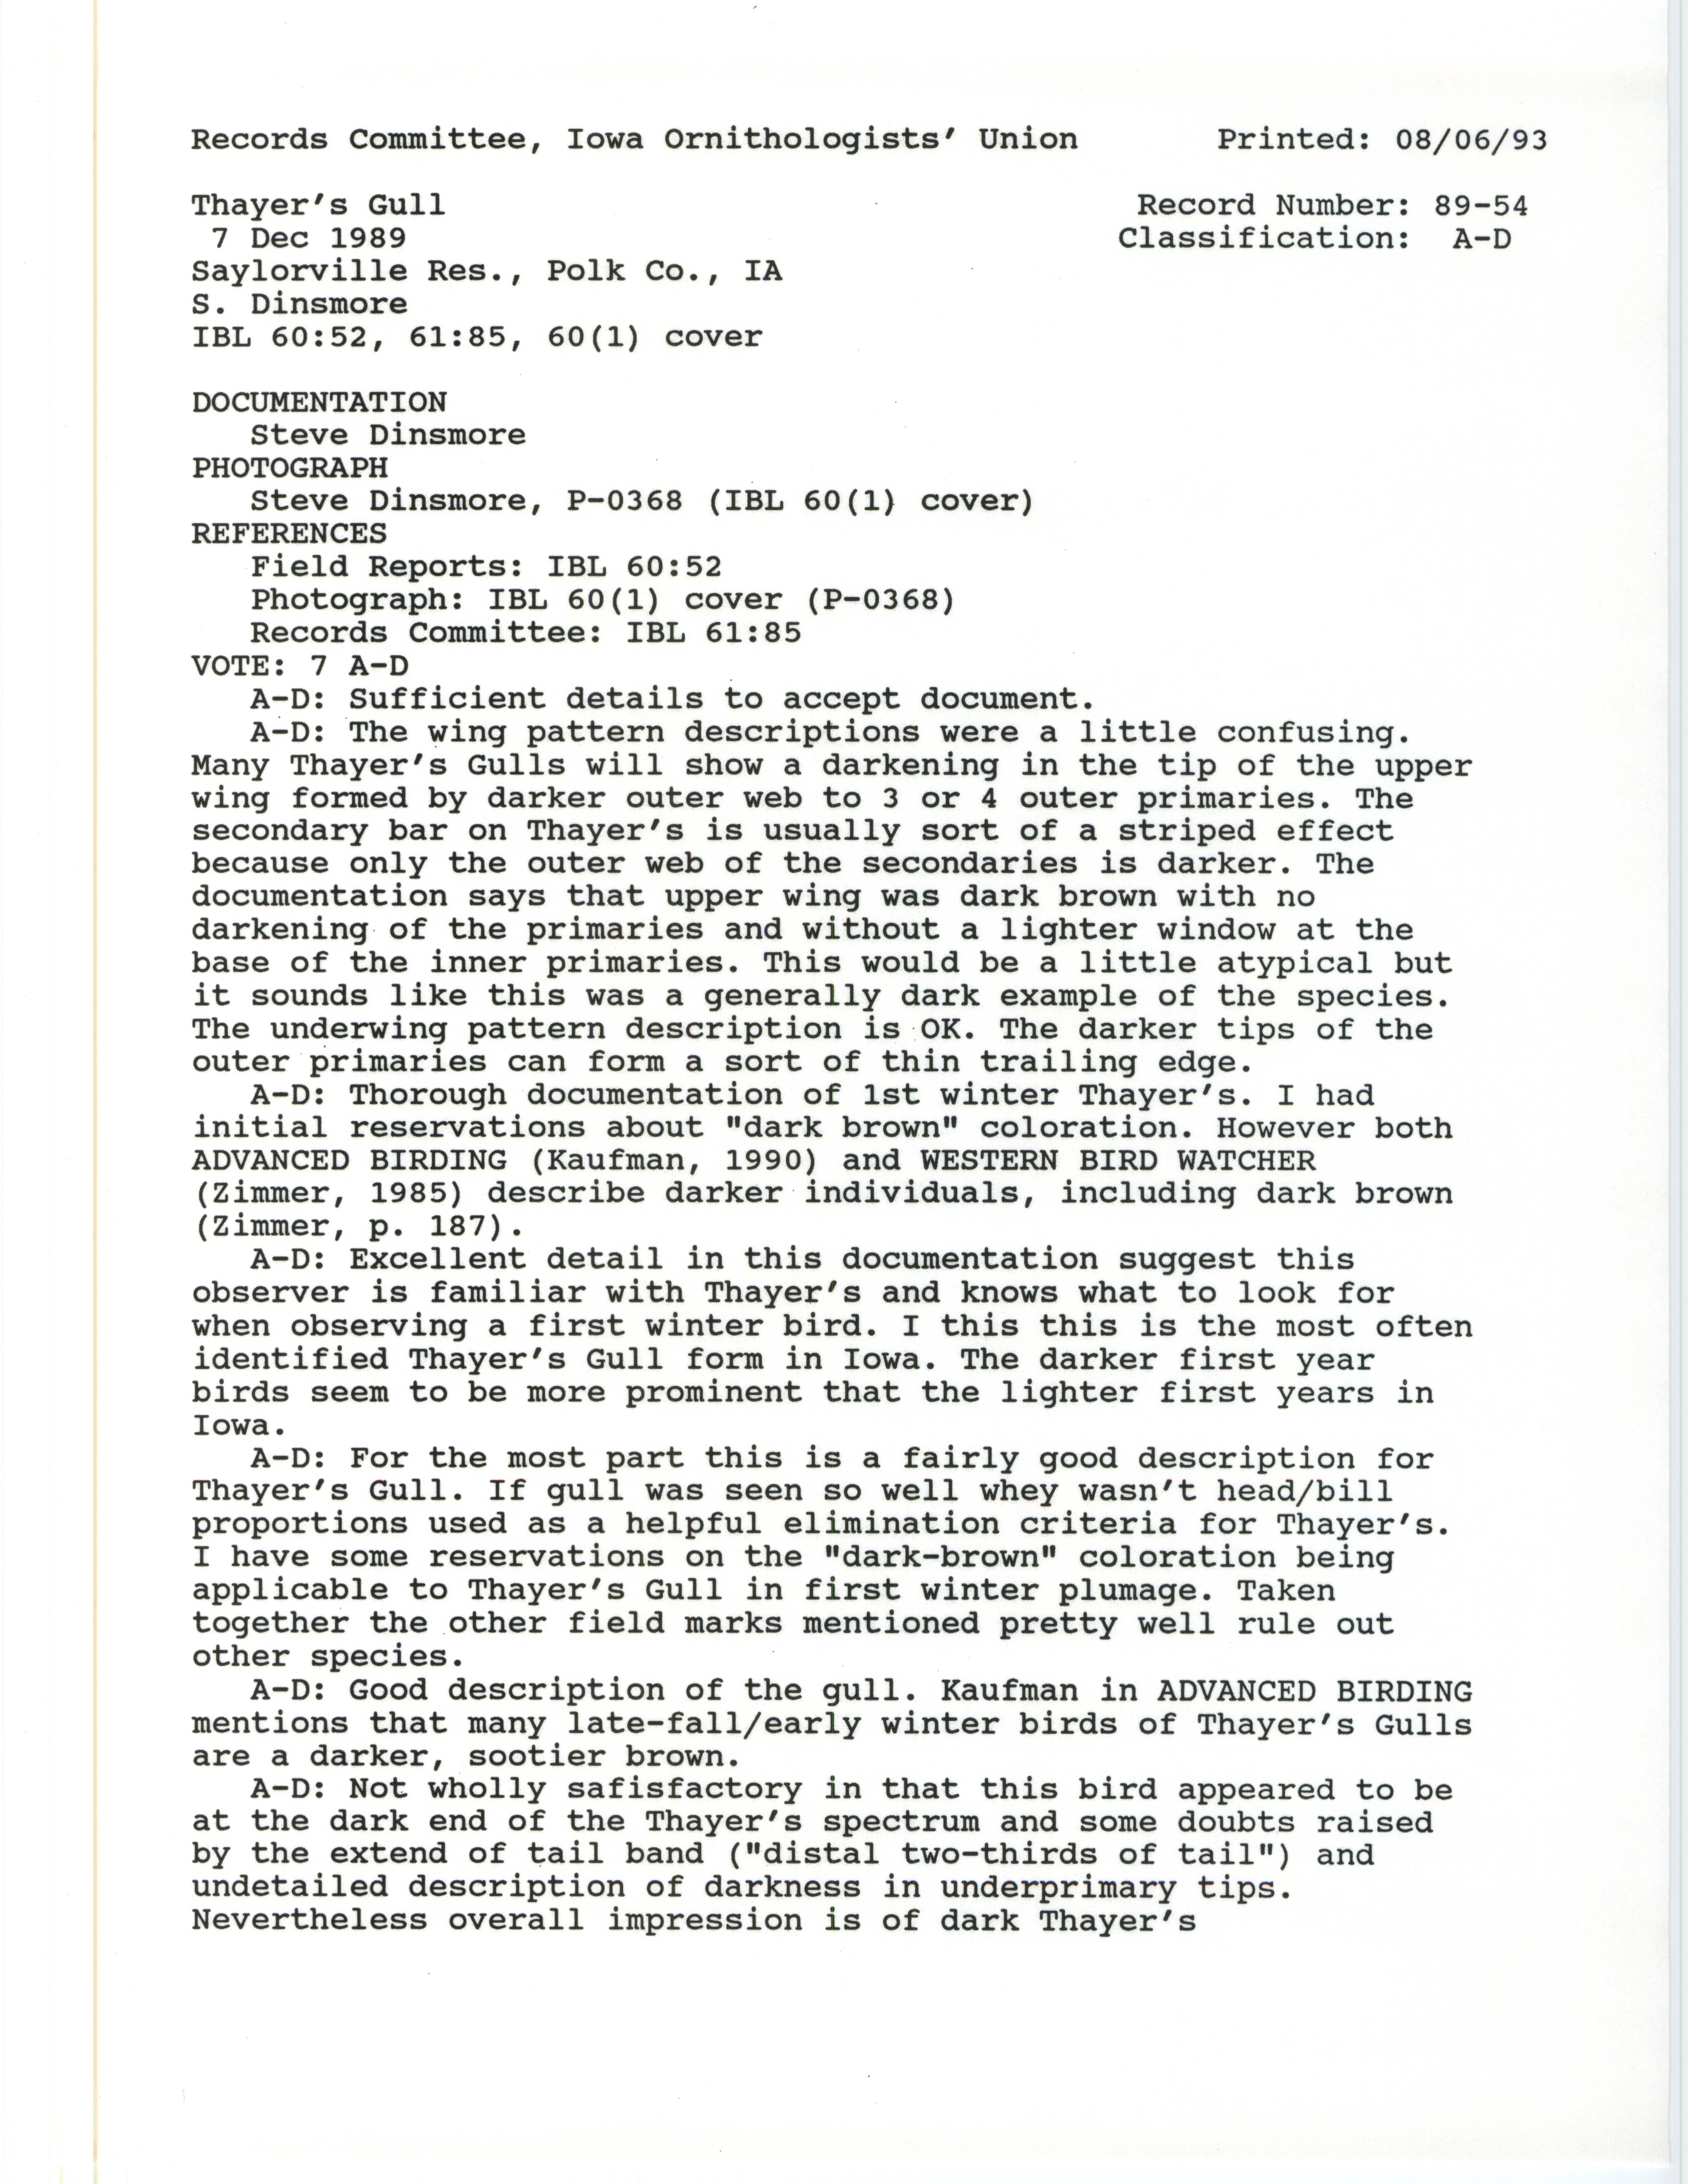 Records Committee review for rare bird sighting of Thayer's Gull at Saylorville Dam, 1989